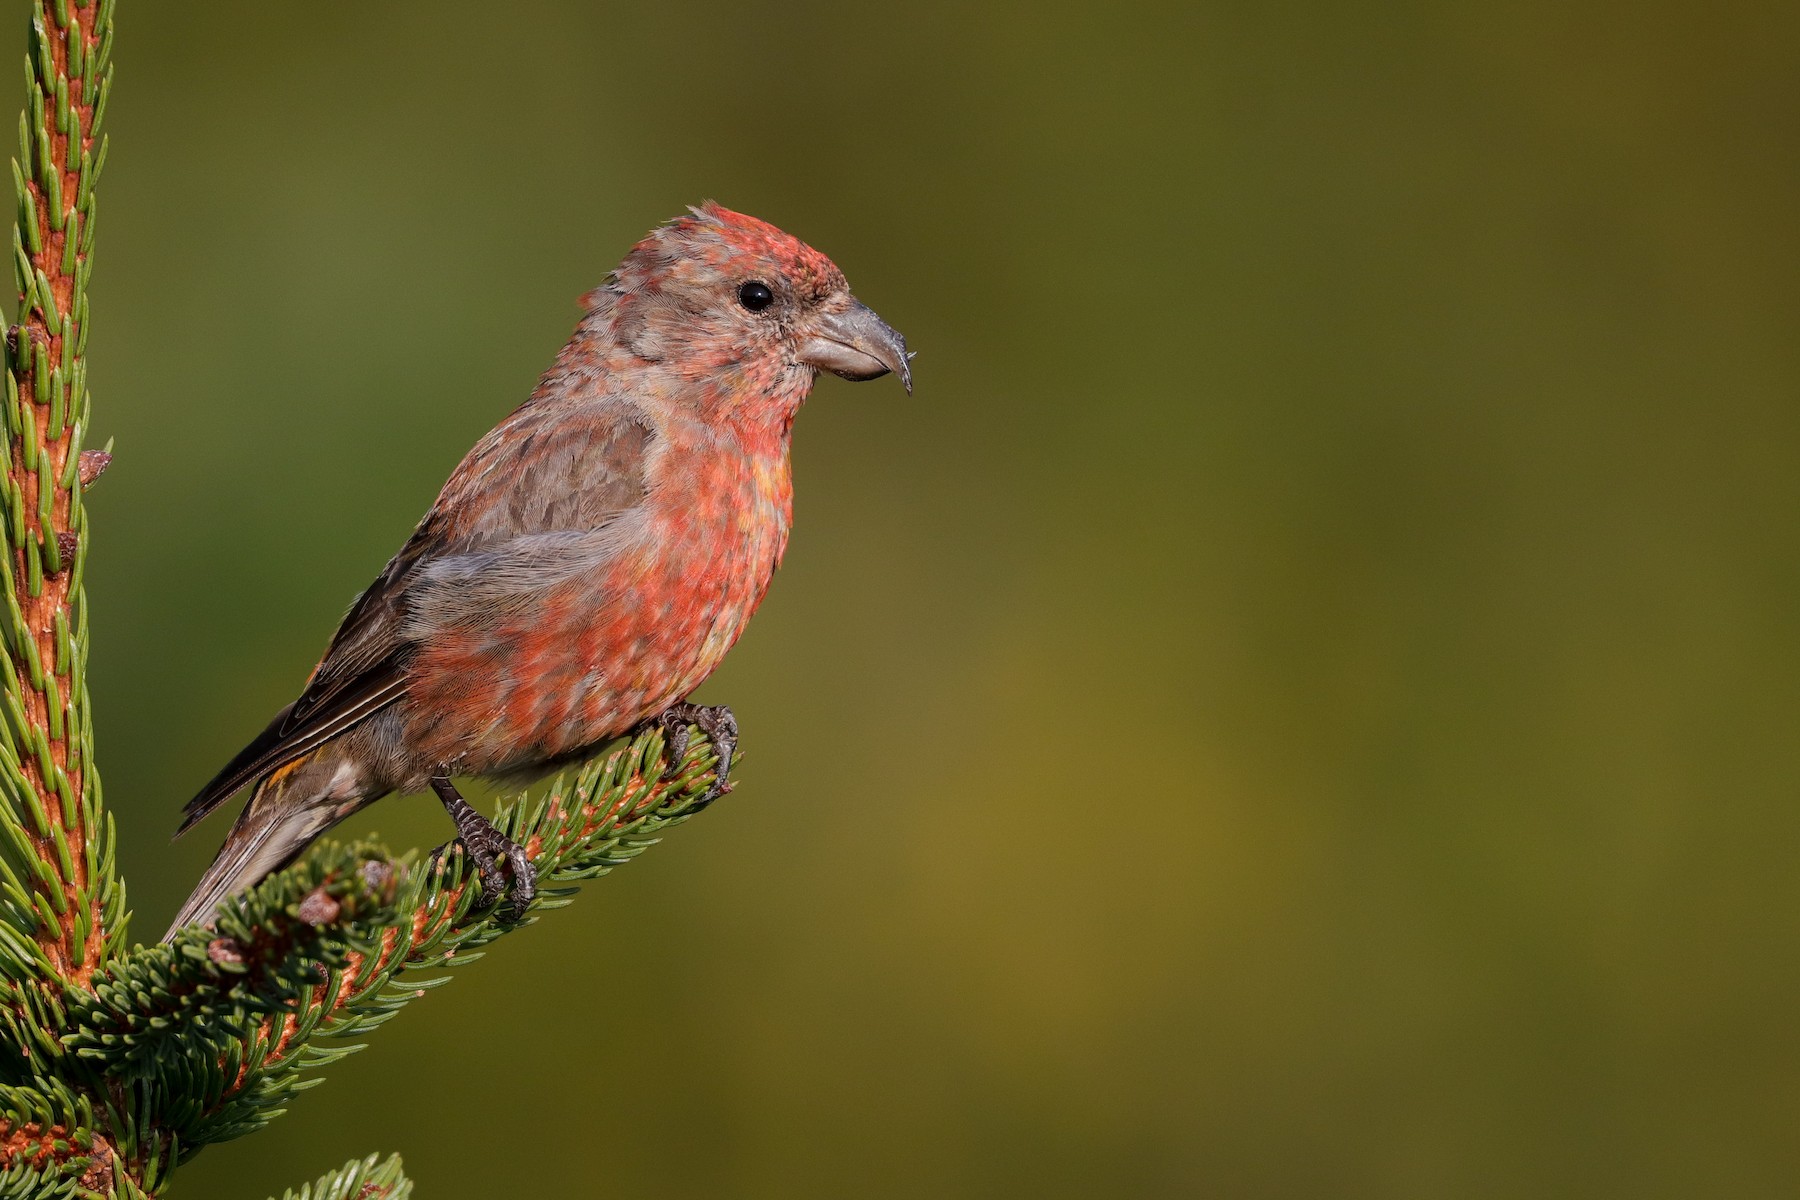 Red Crossbill (Appalachian or type 1) - Martina Nordstrand